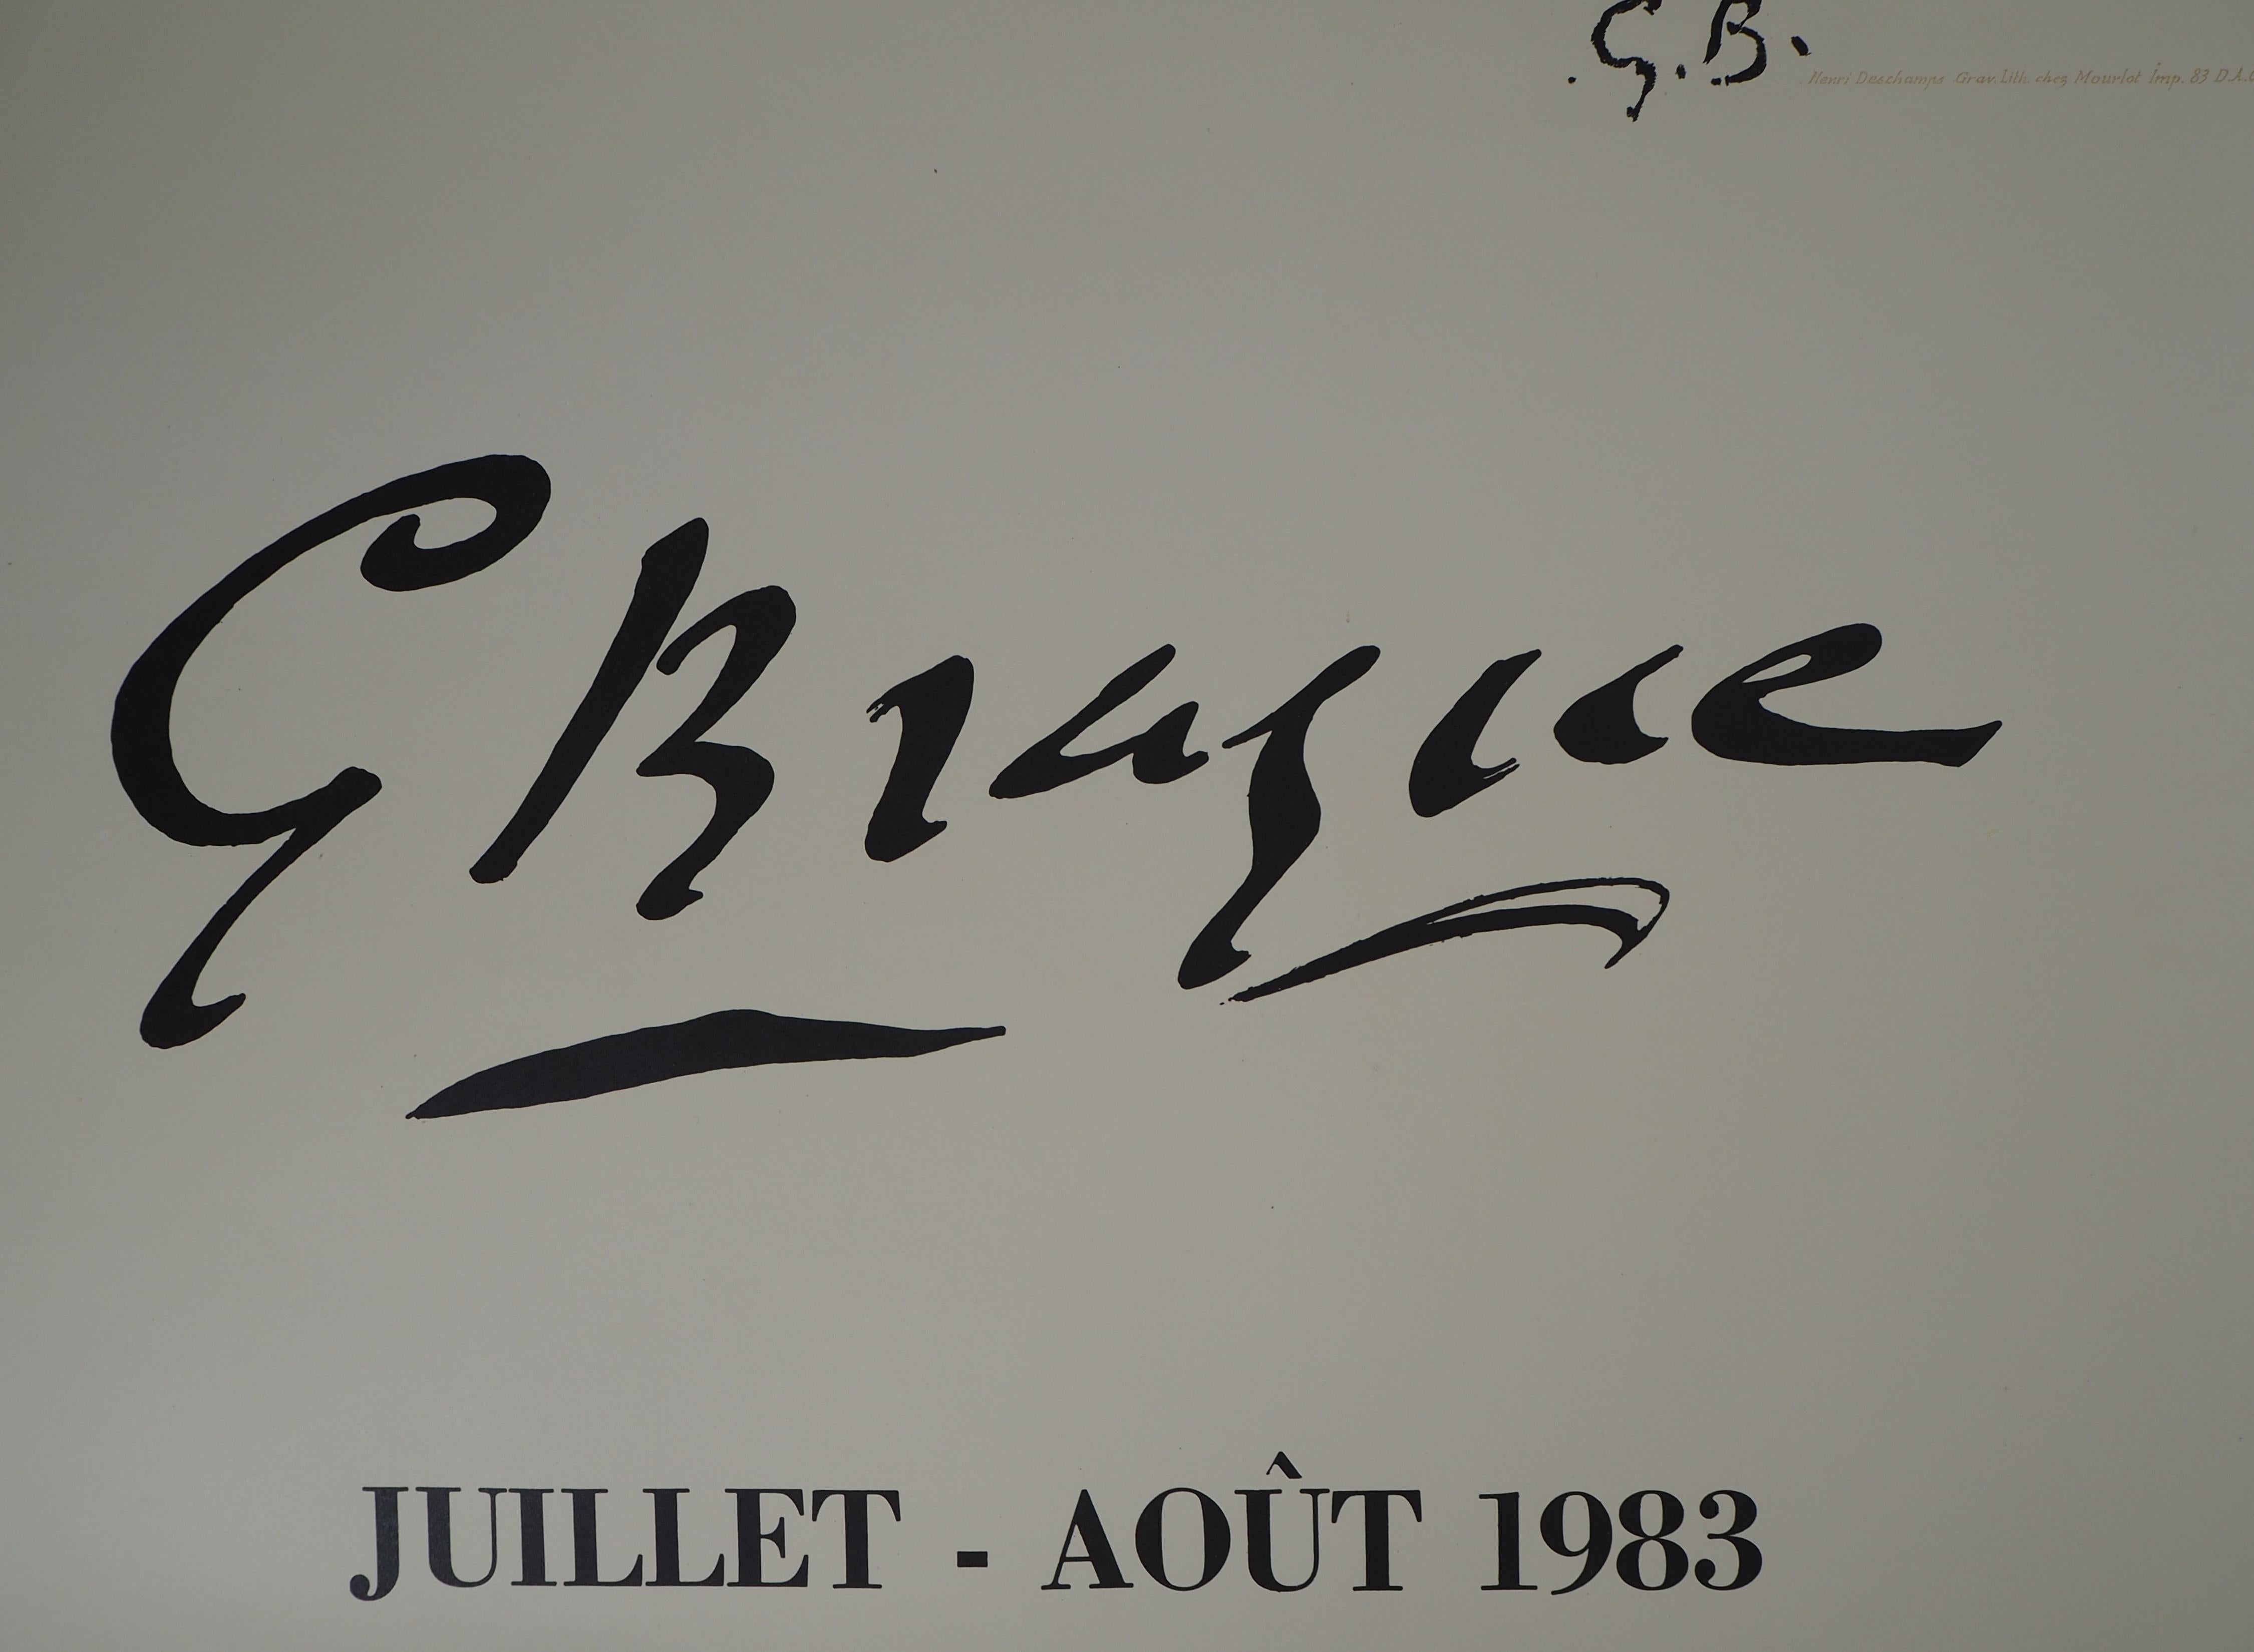 Georges Braque (after)
Two Birds Flying, 1983

Lithograph (printed in Atelier Mourlot)
Printed signature in the plate
On heavy paper 89 x 61 cm (c. 36 x 24 inch)
Original lithograph poster for the 1983 Braque exhibition at Musée d'Art Moderne -